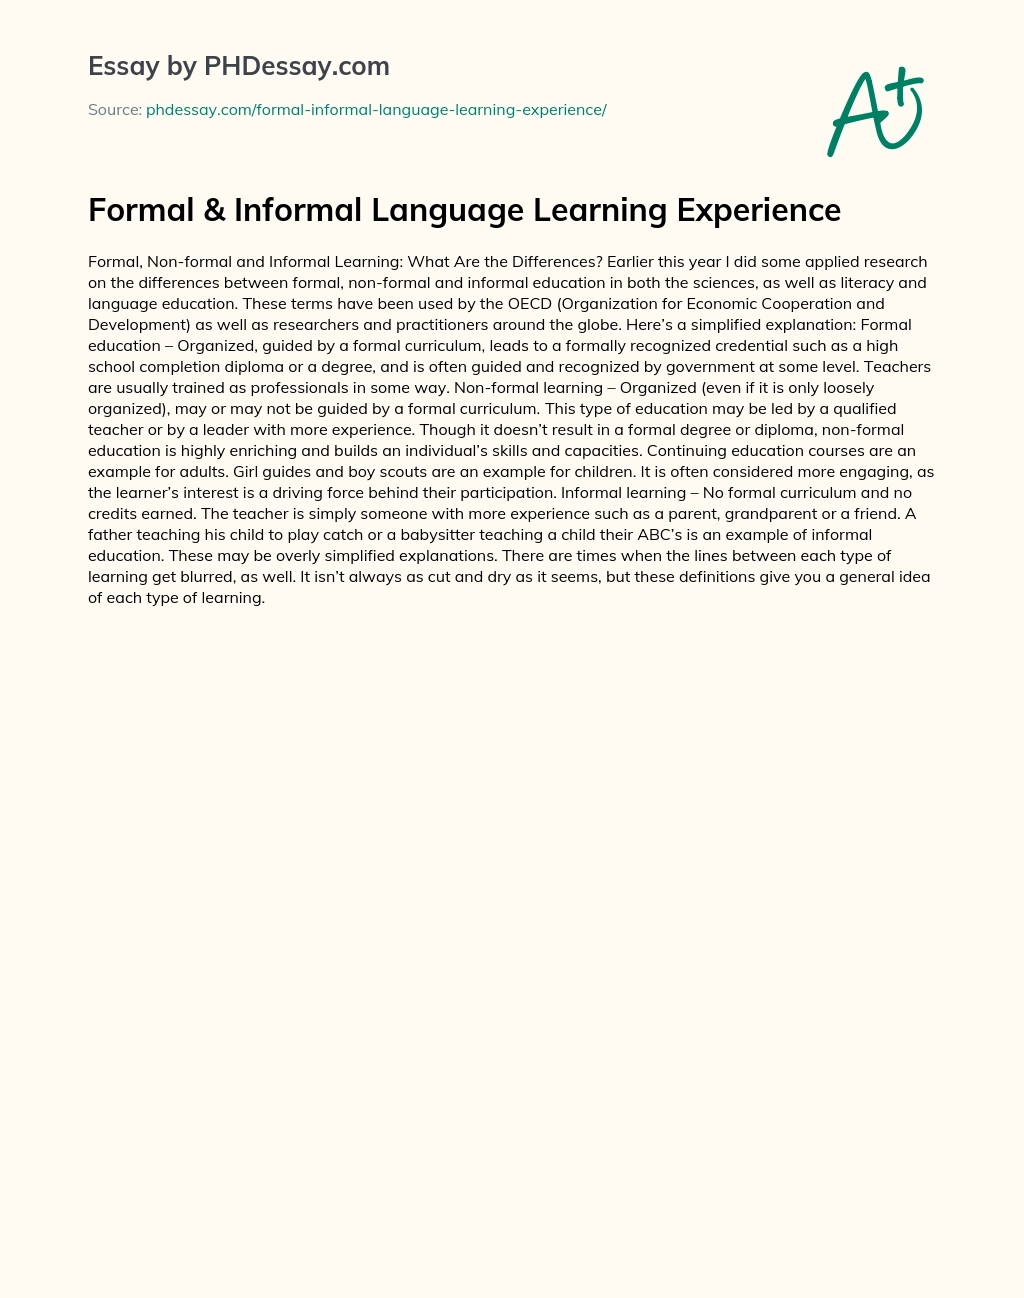 Formal & Informal Language Learning Experience essay